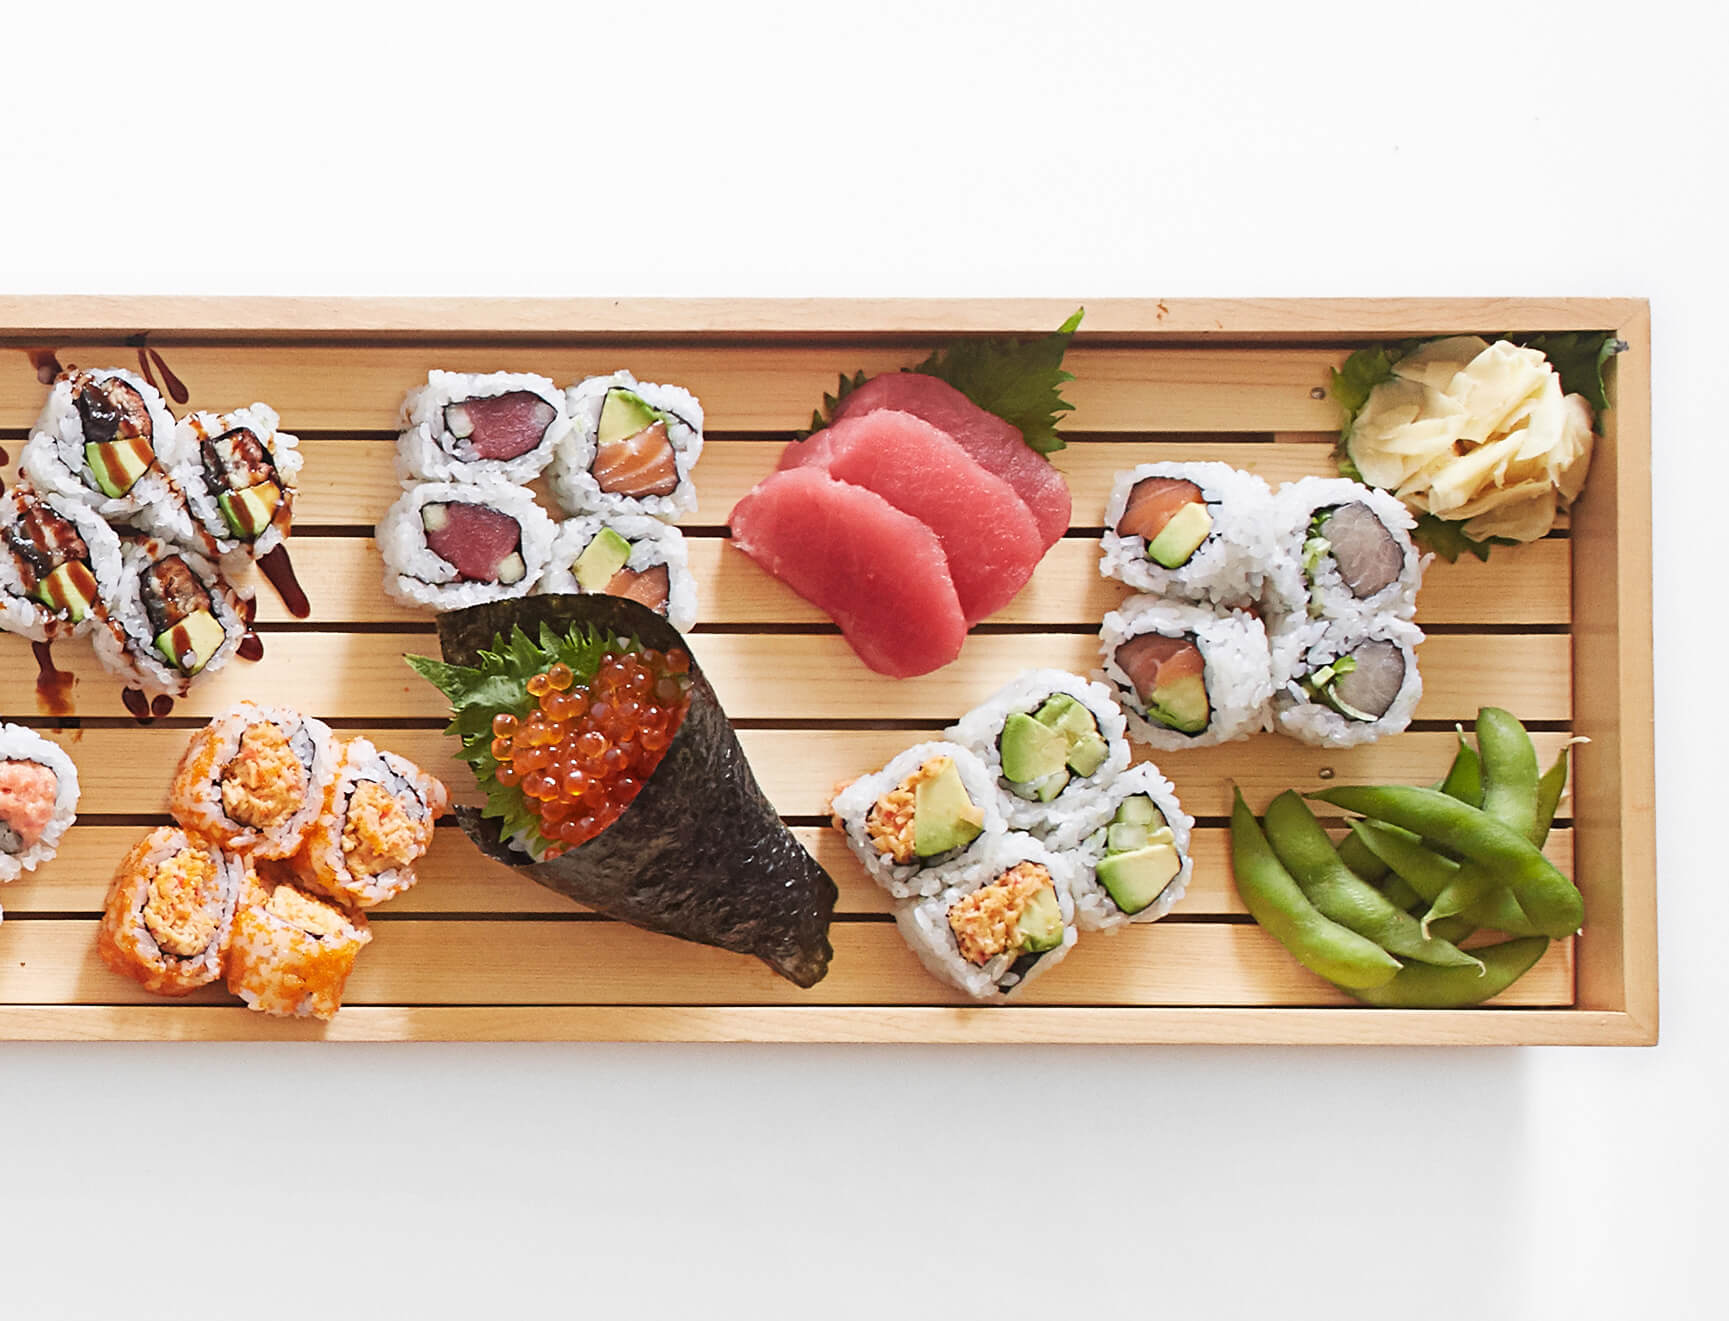 A bamboo tray features an assortment of traditional sushi and rolls, garnished with ginger and edamame.